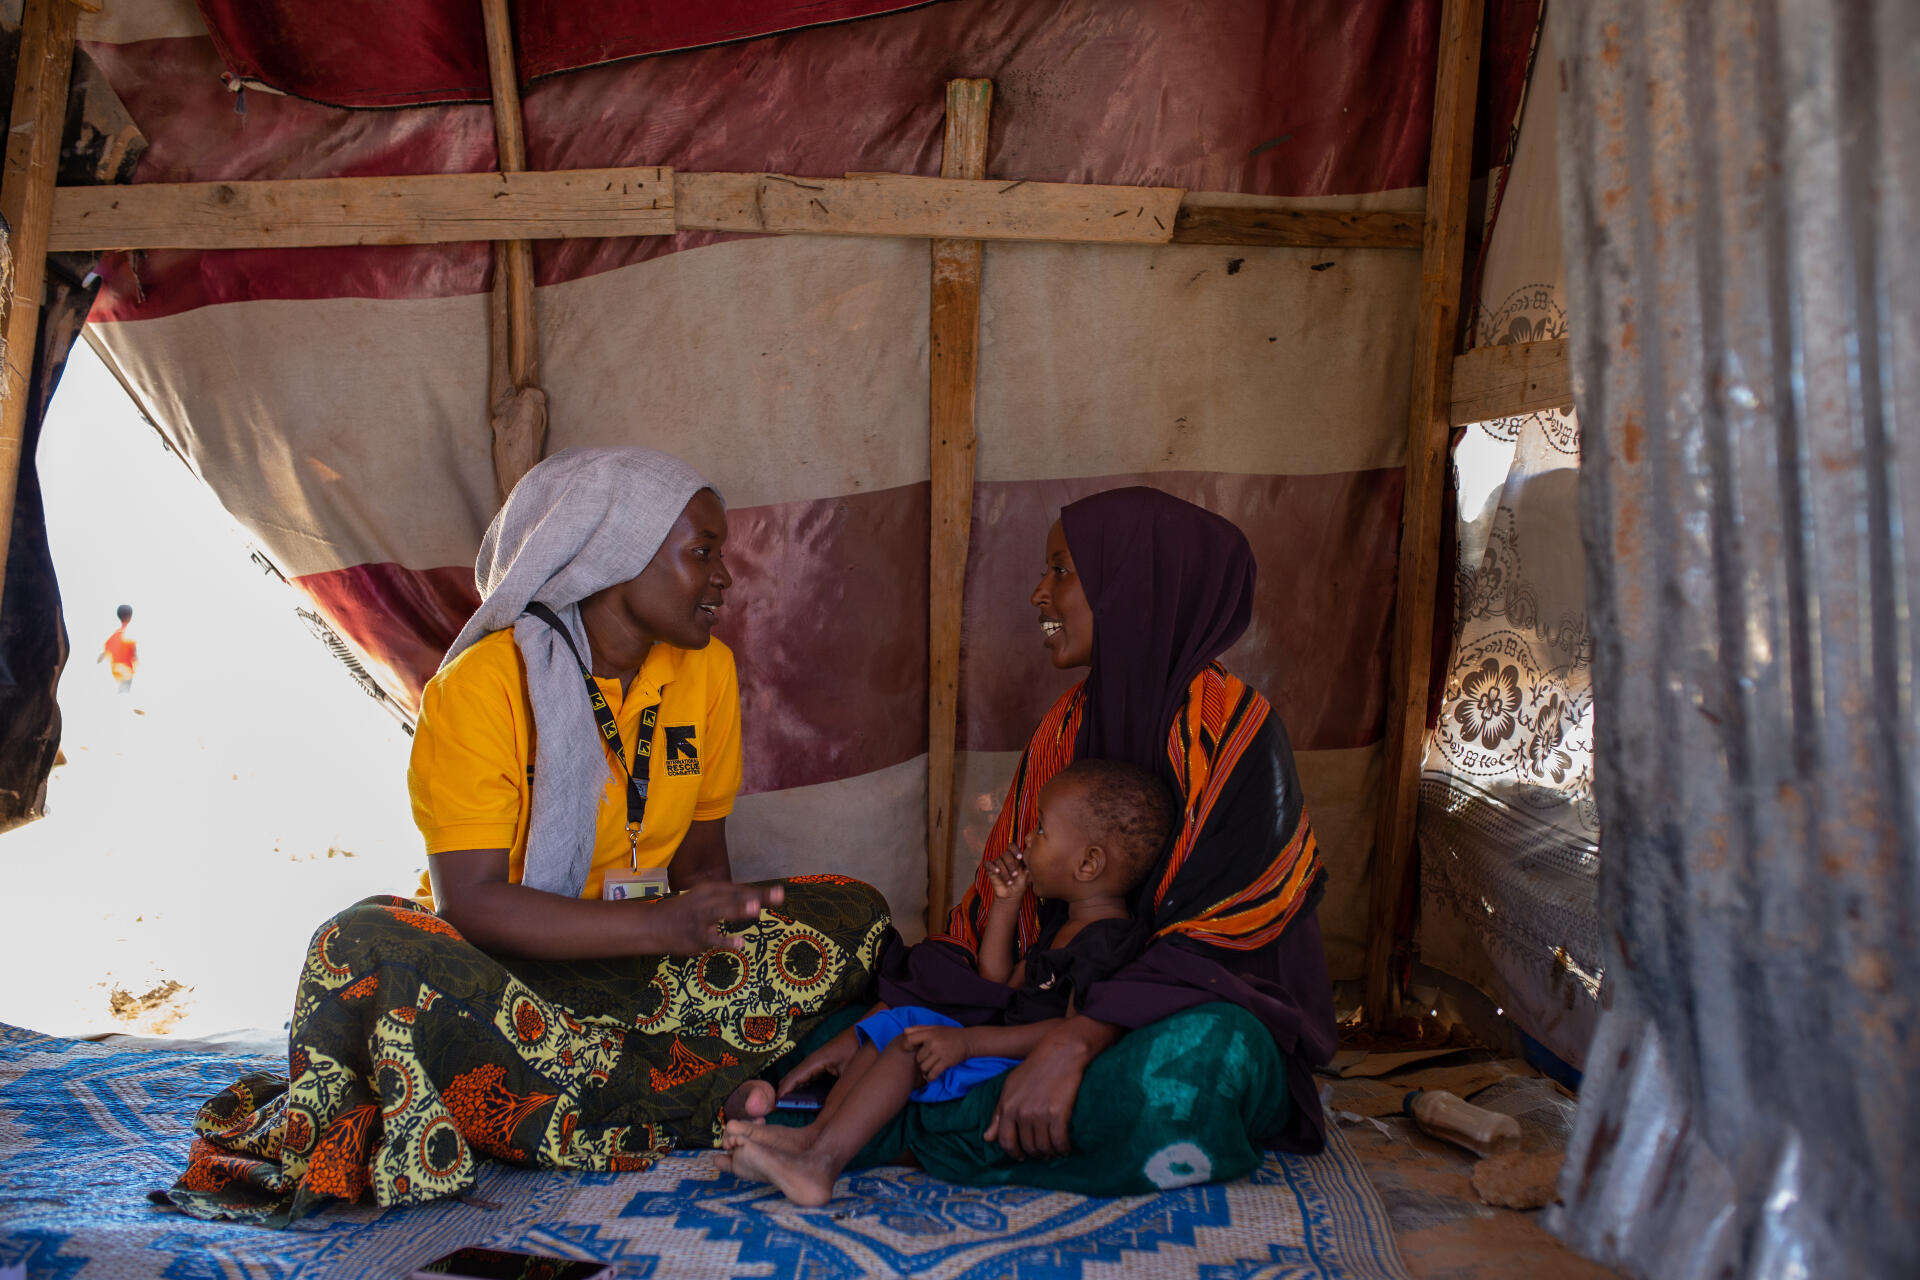 An IRC staff member consults a mother and her child inside a small building in a camp for internally displaced Somalis. The pair share a conversation while sitting on the floor.